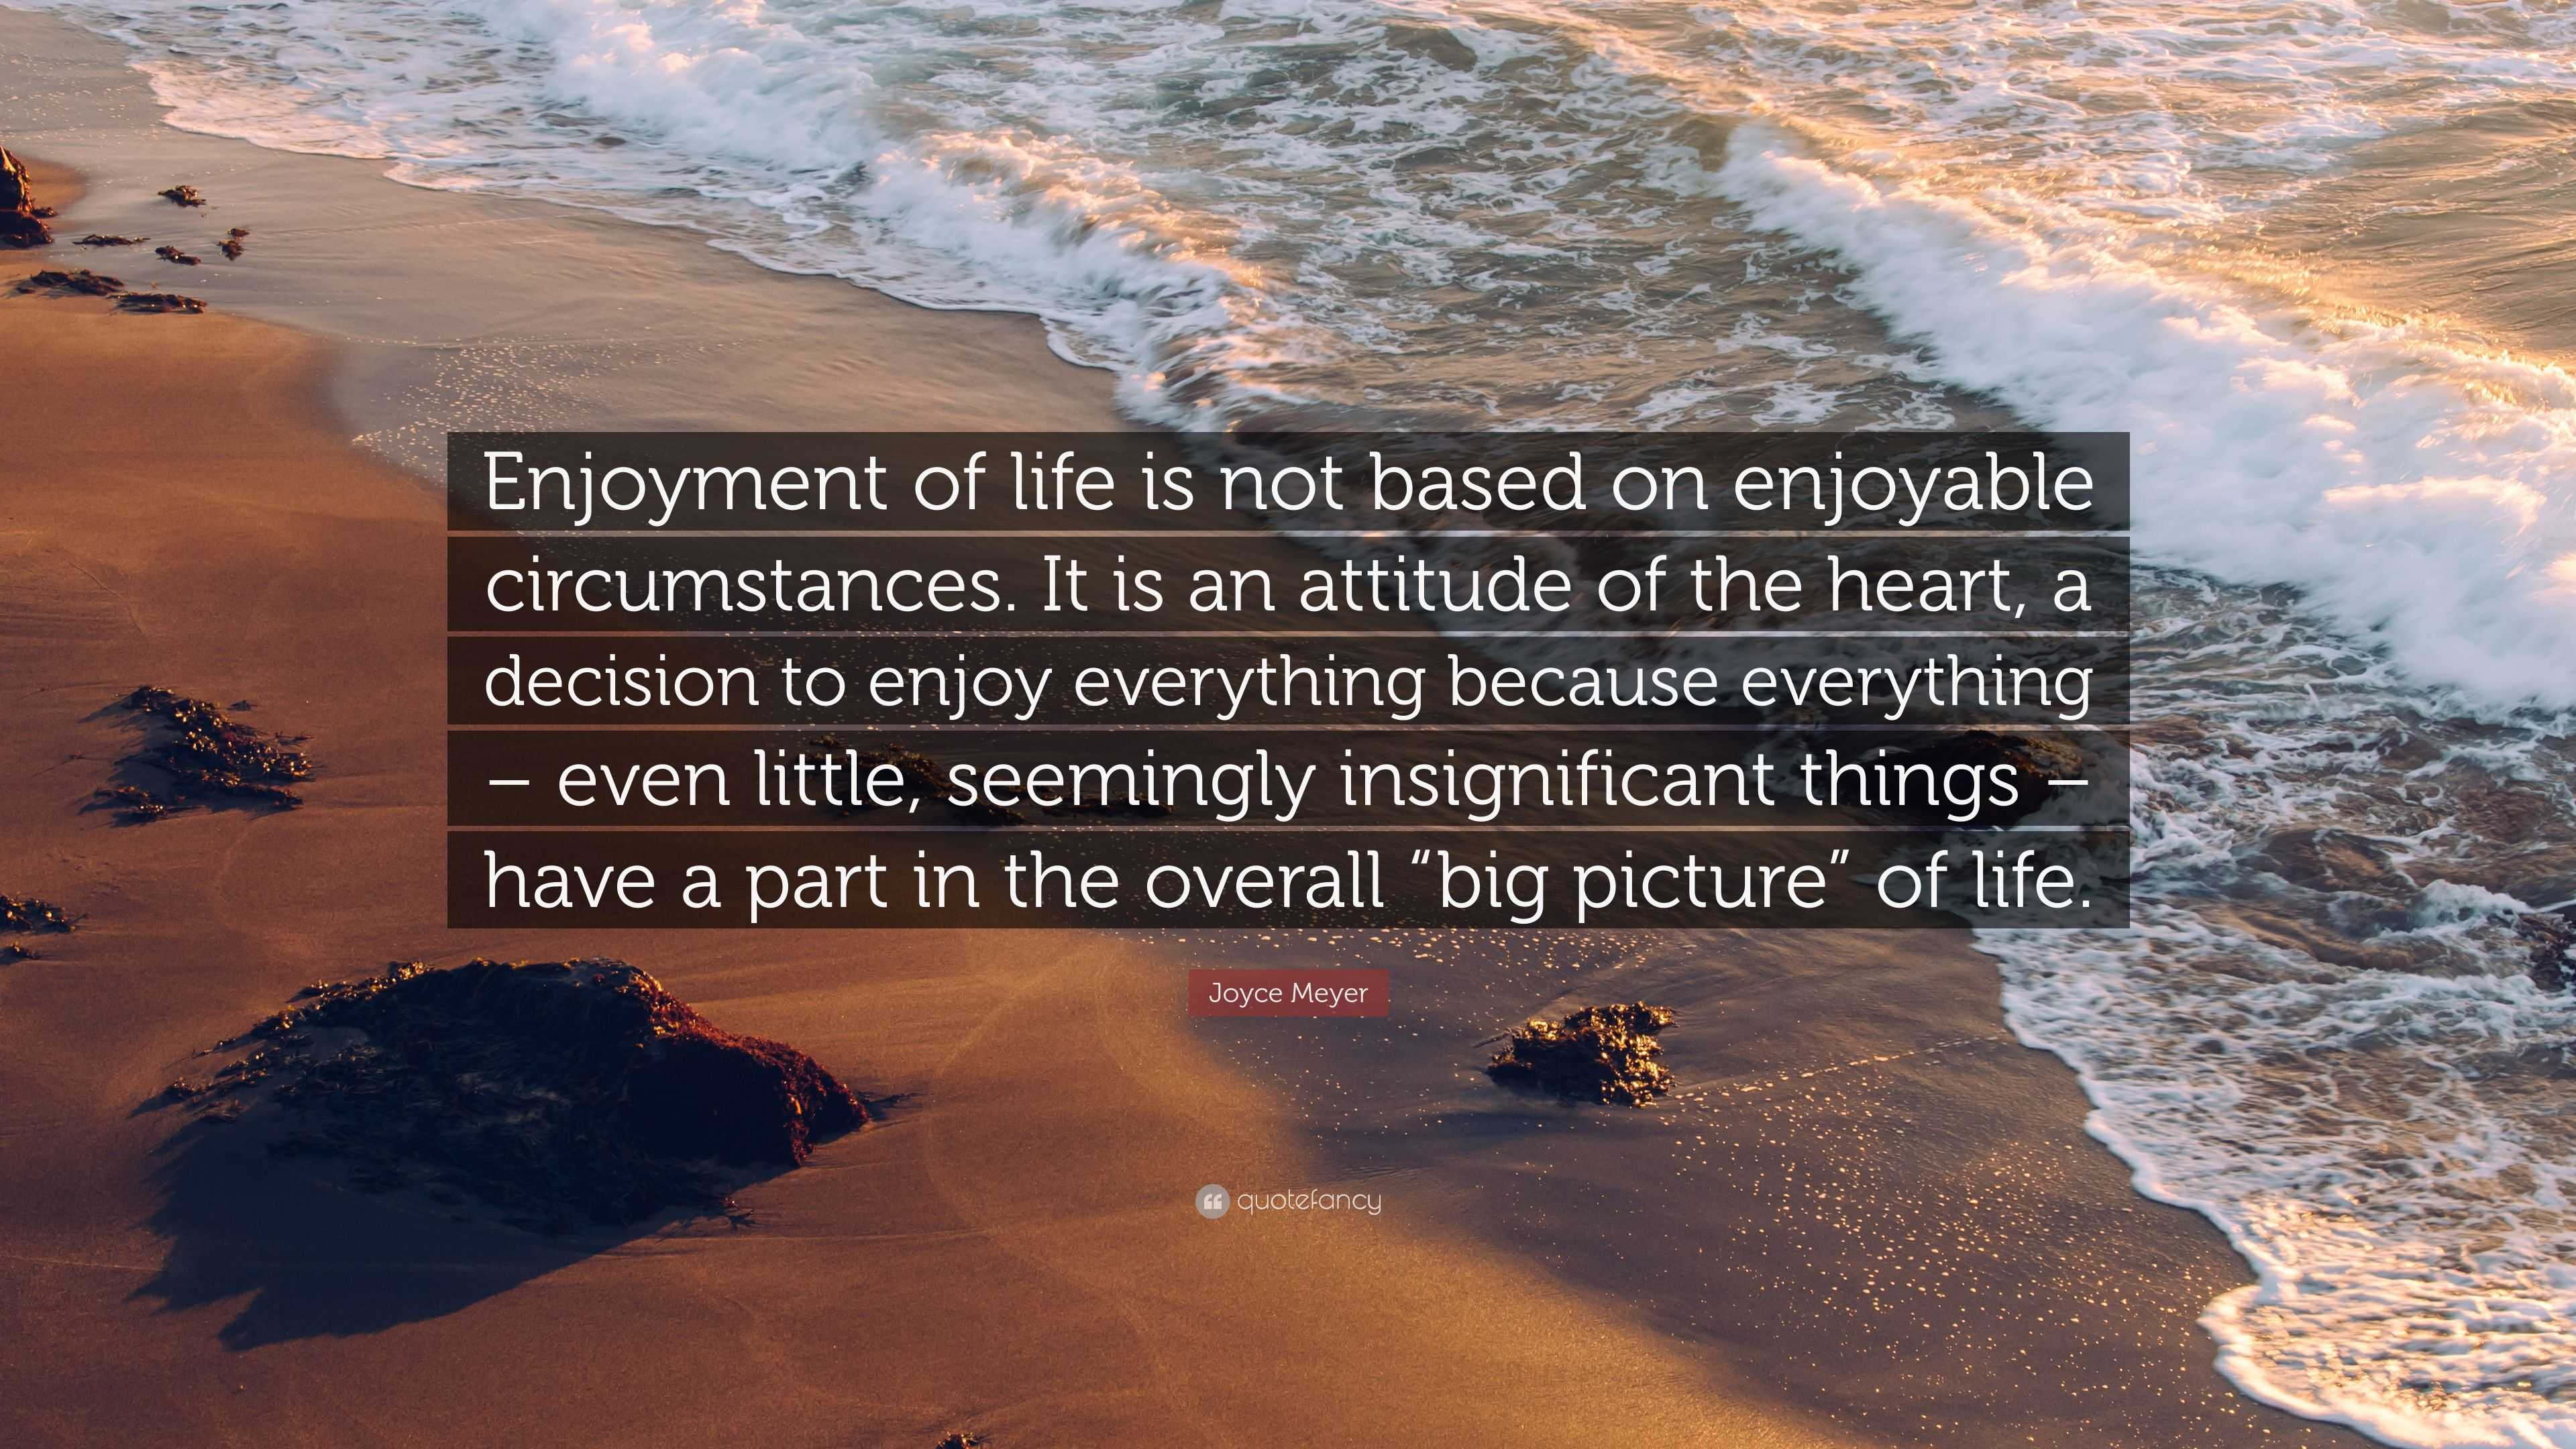 Enjoyment Quote : Famous quotes about 'Enjoyment' - Sualci Quotes 2019